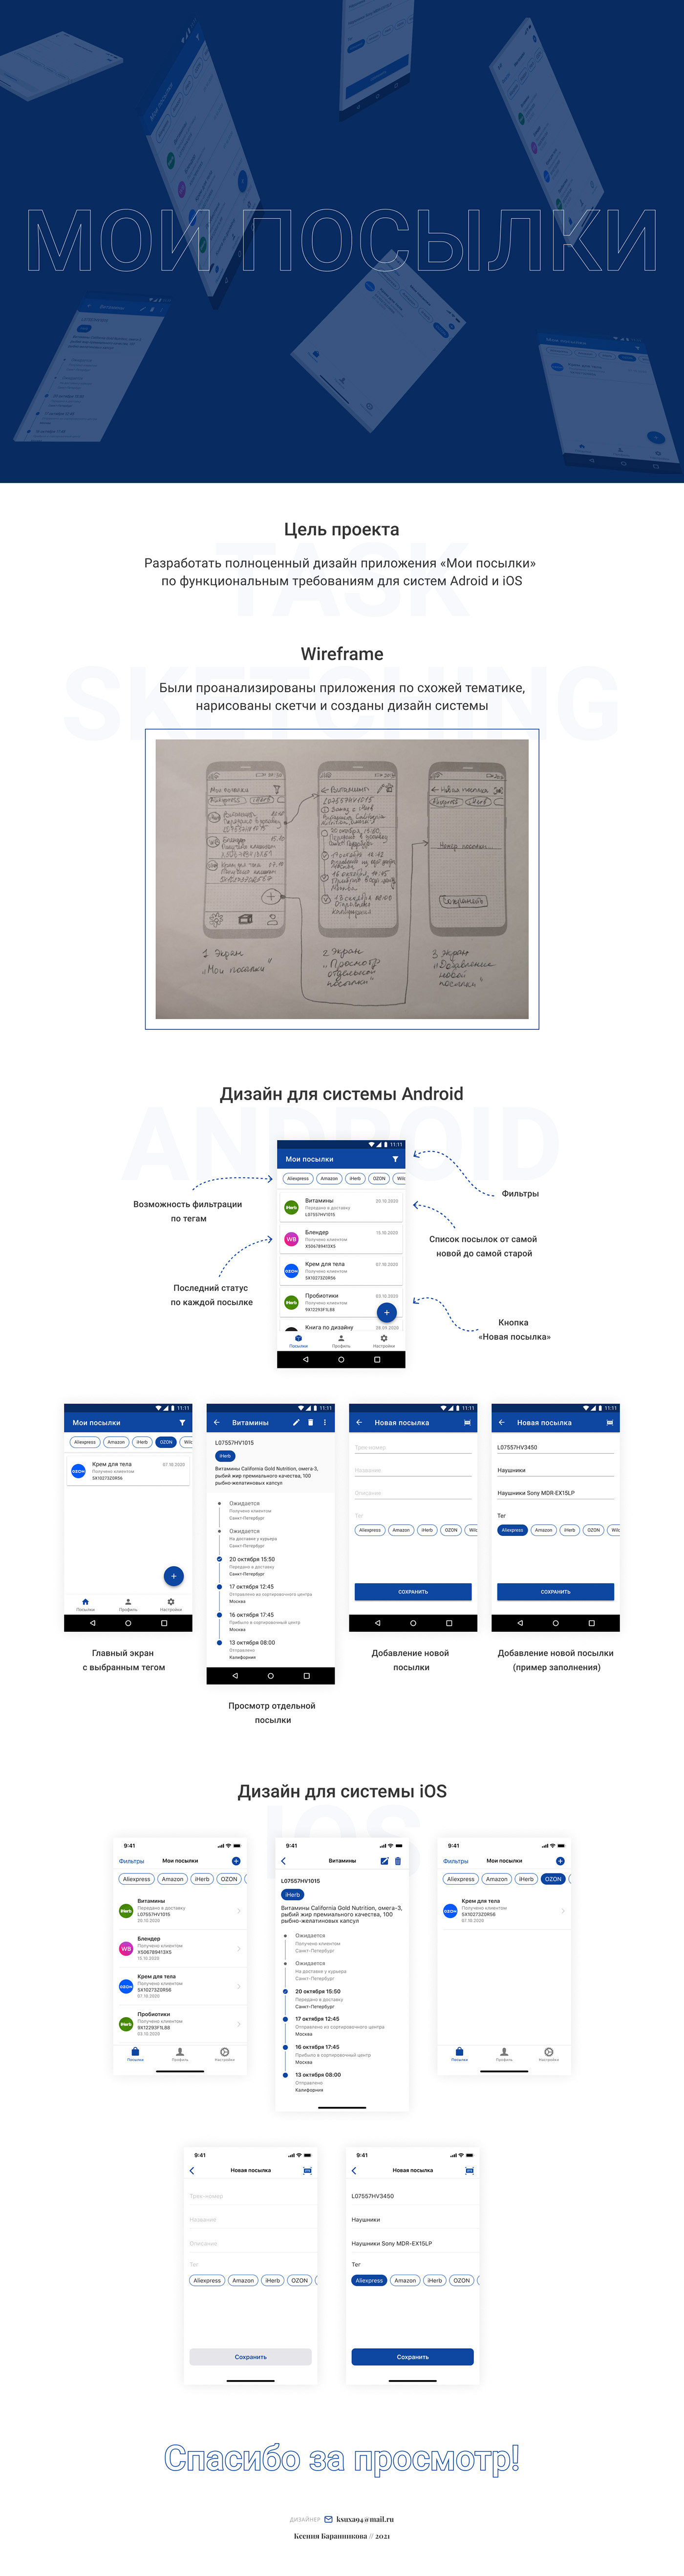 Appdesign design mobile mobile app design mobiledesign UI ux android ios